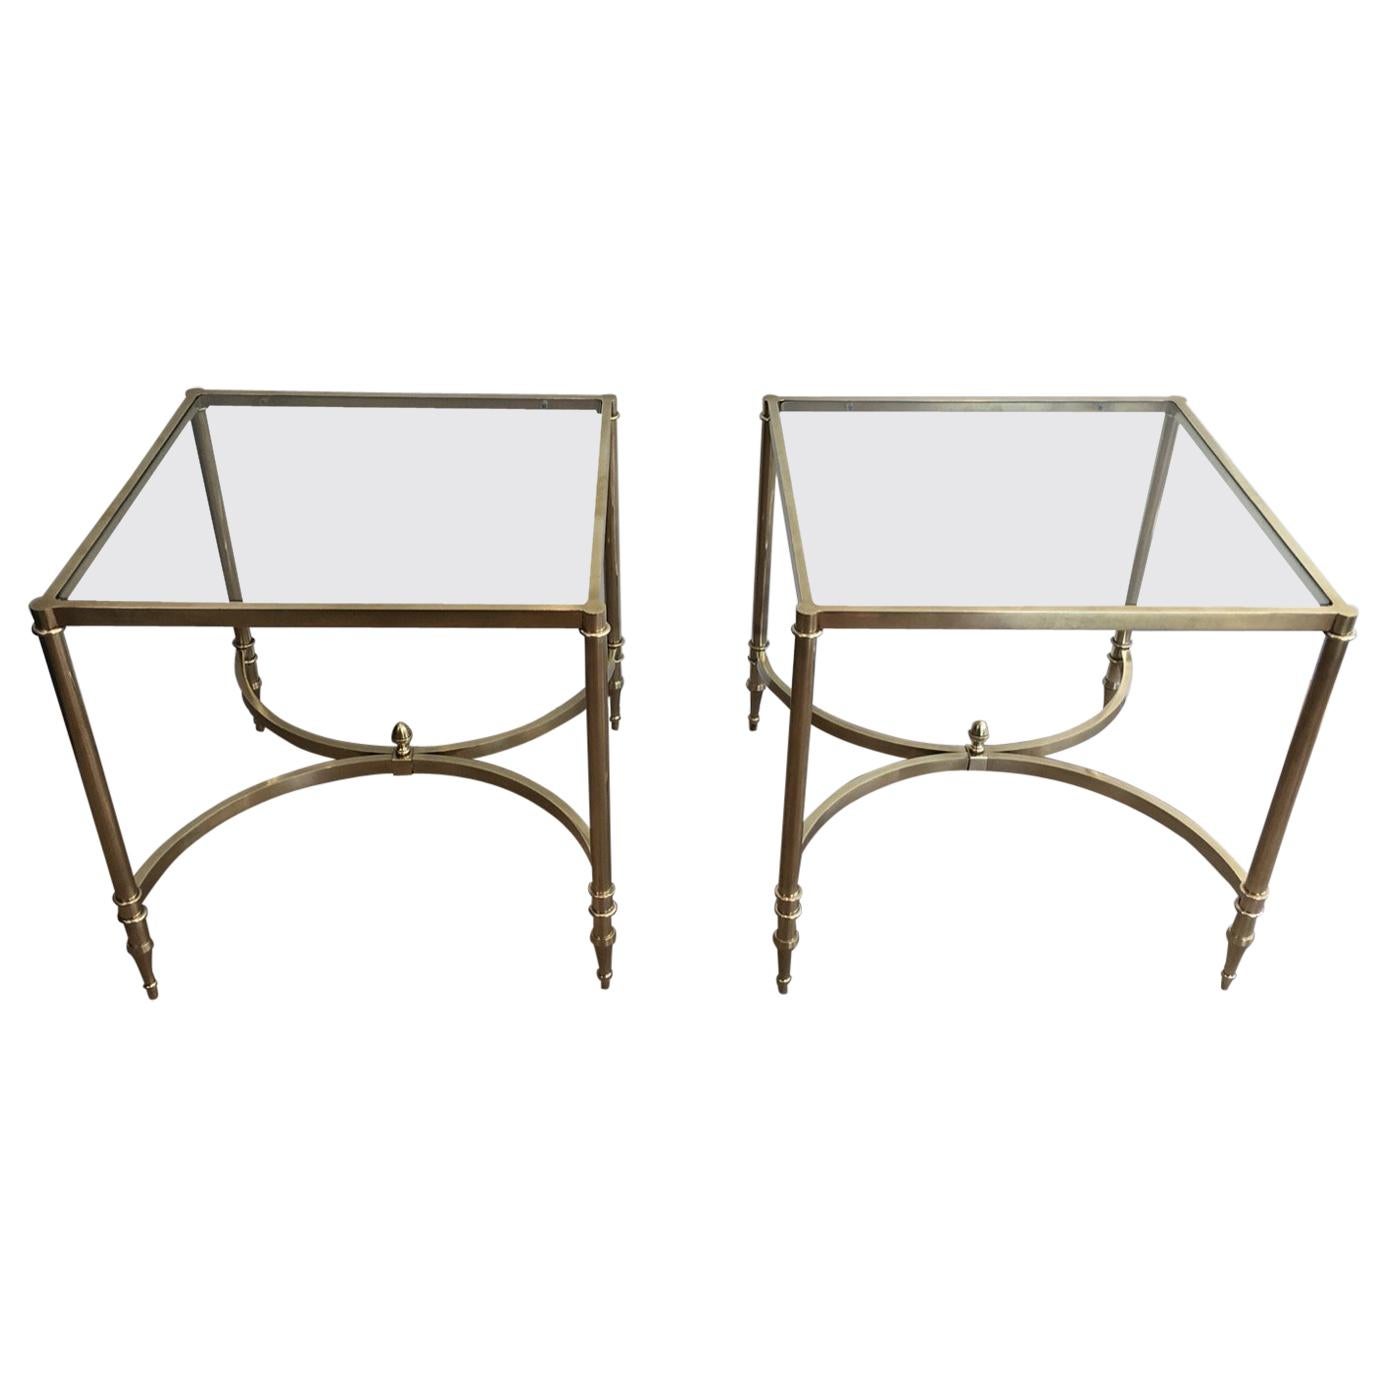 in the Style of Maison Jansen. Rare Large Pair of Neoclassical Brass Side Tables